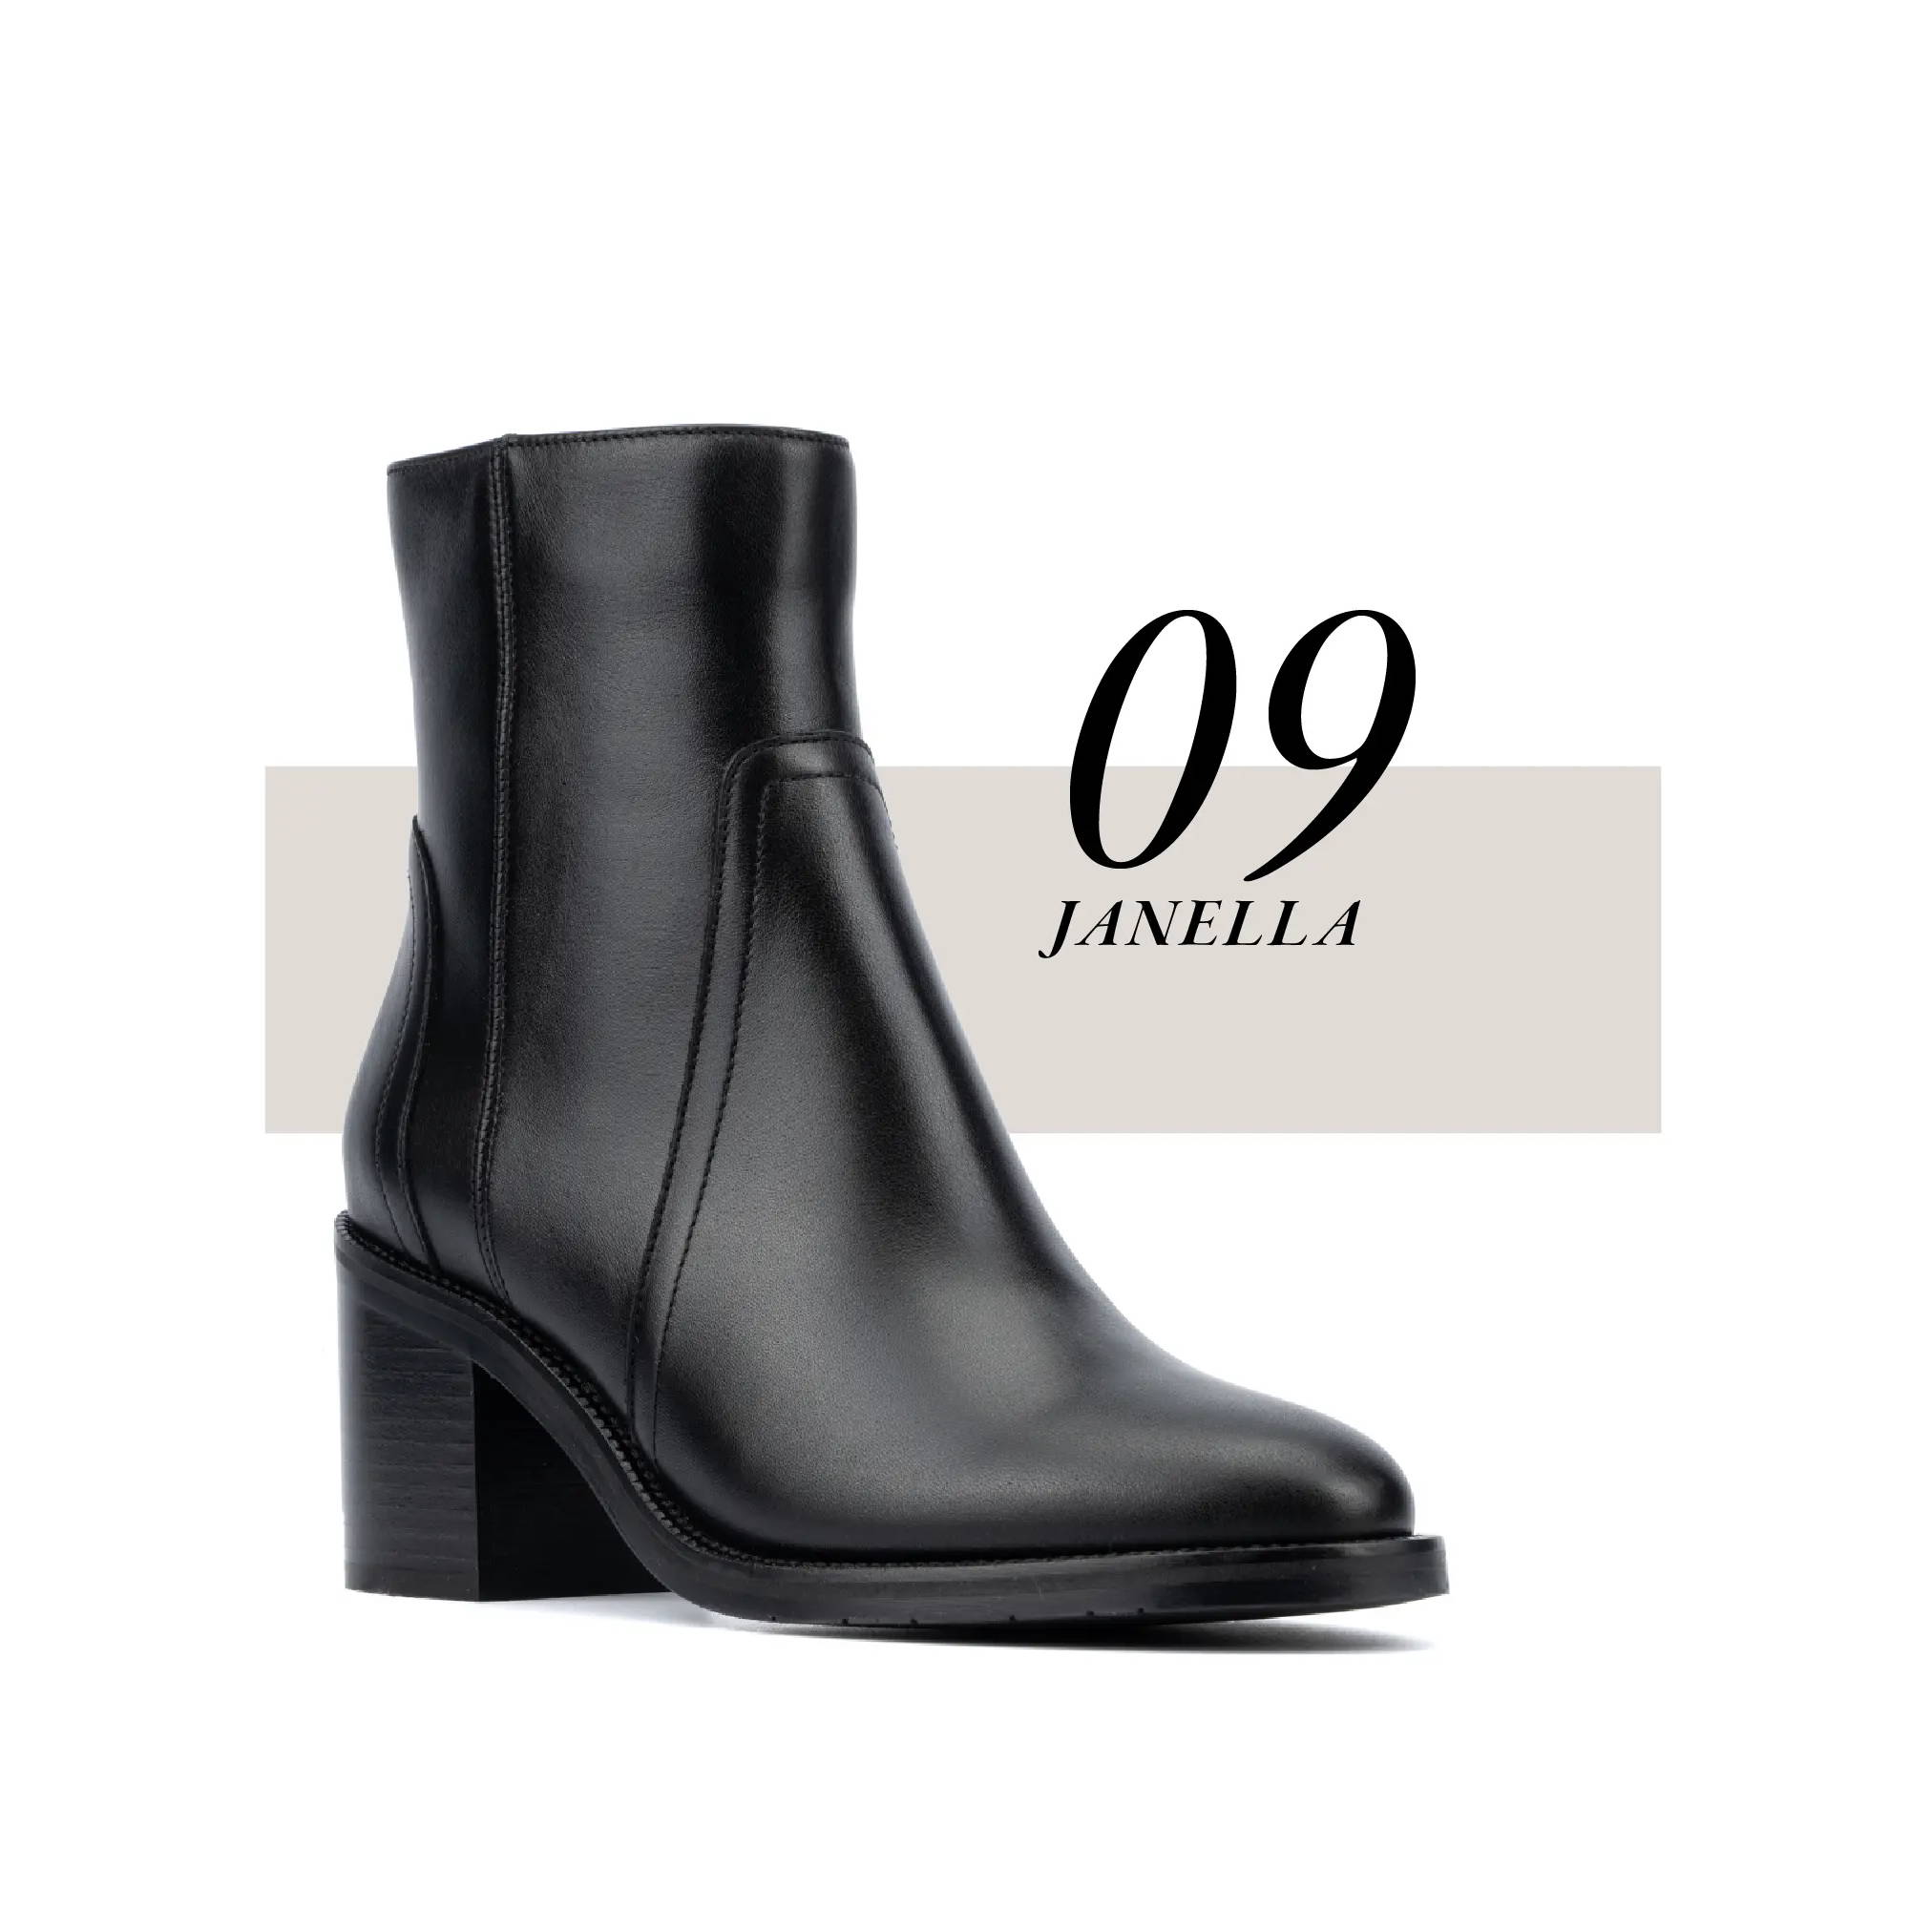 9: The Janella bootie in Black